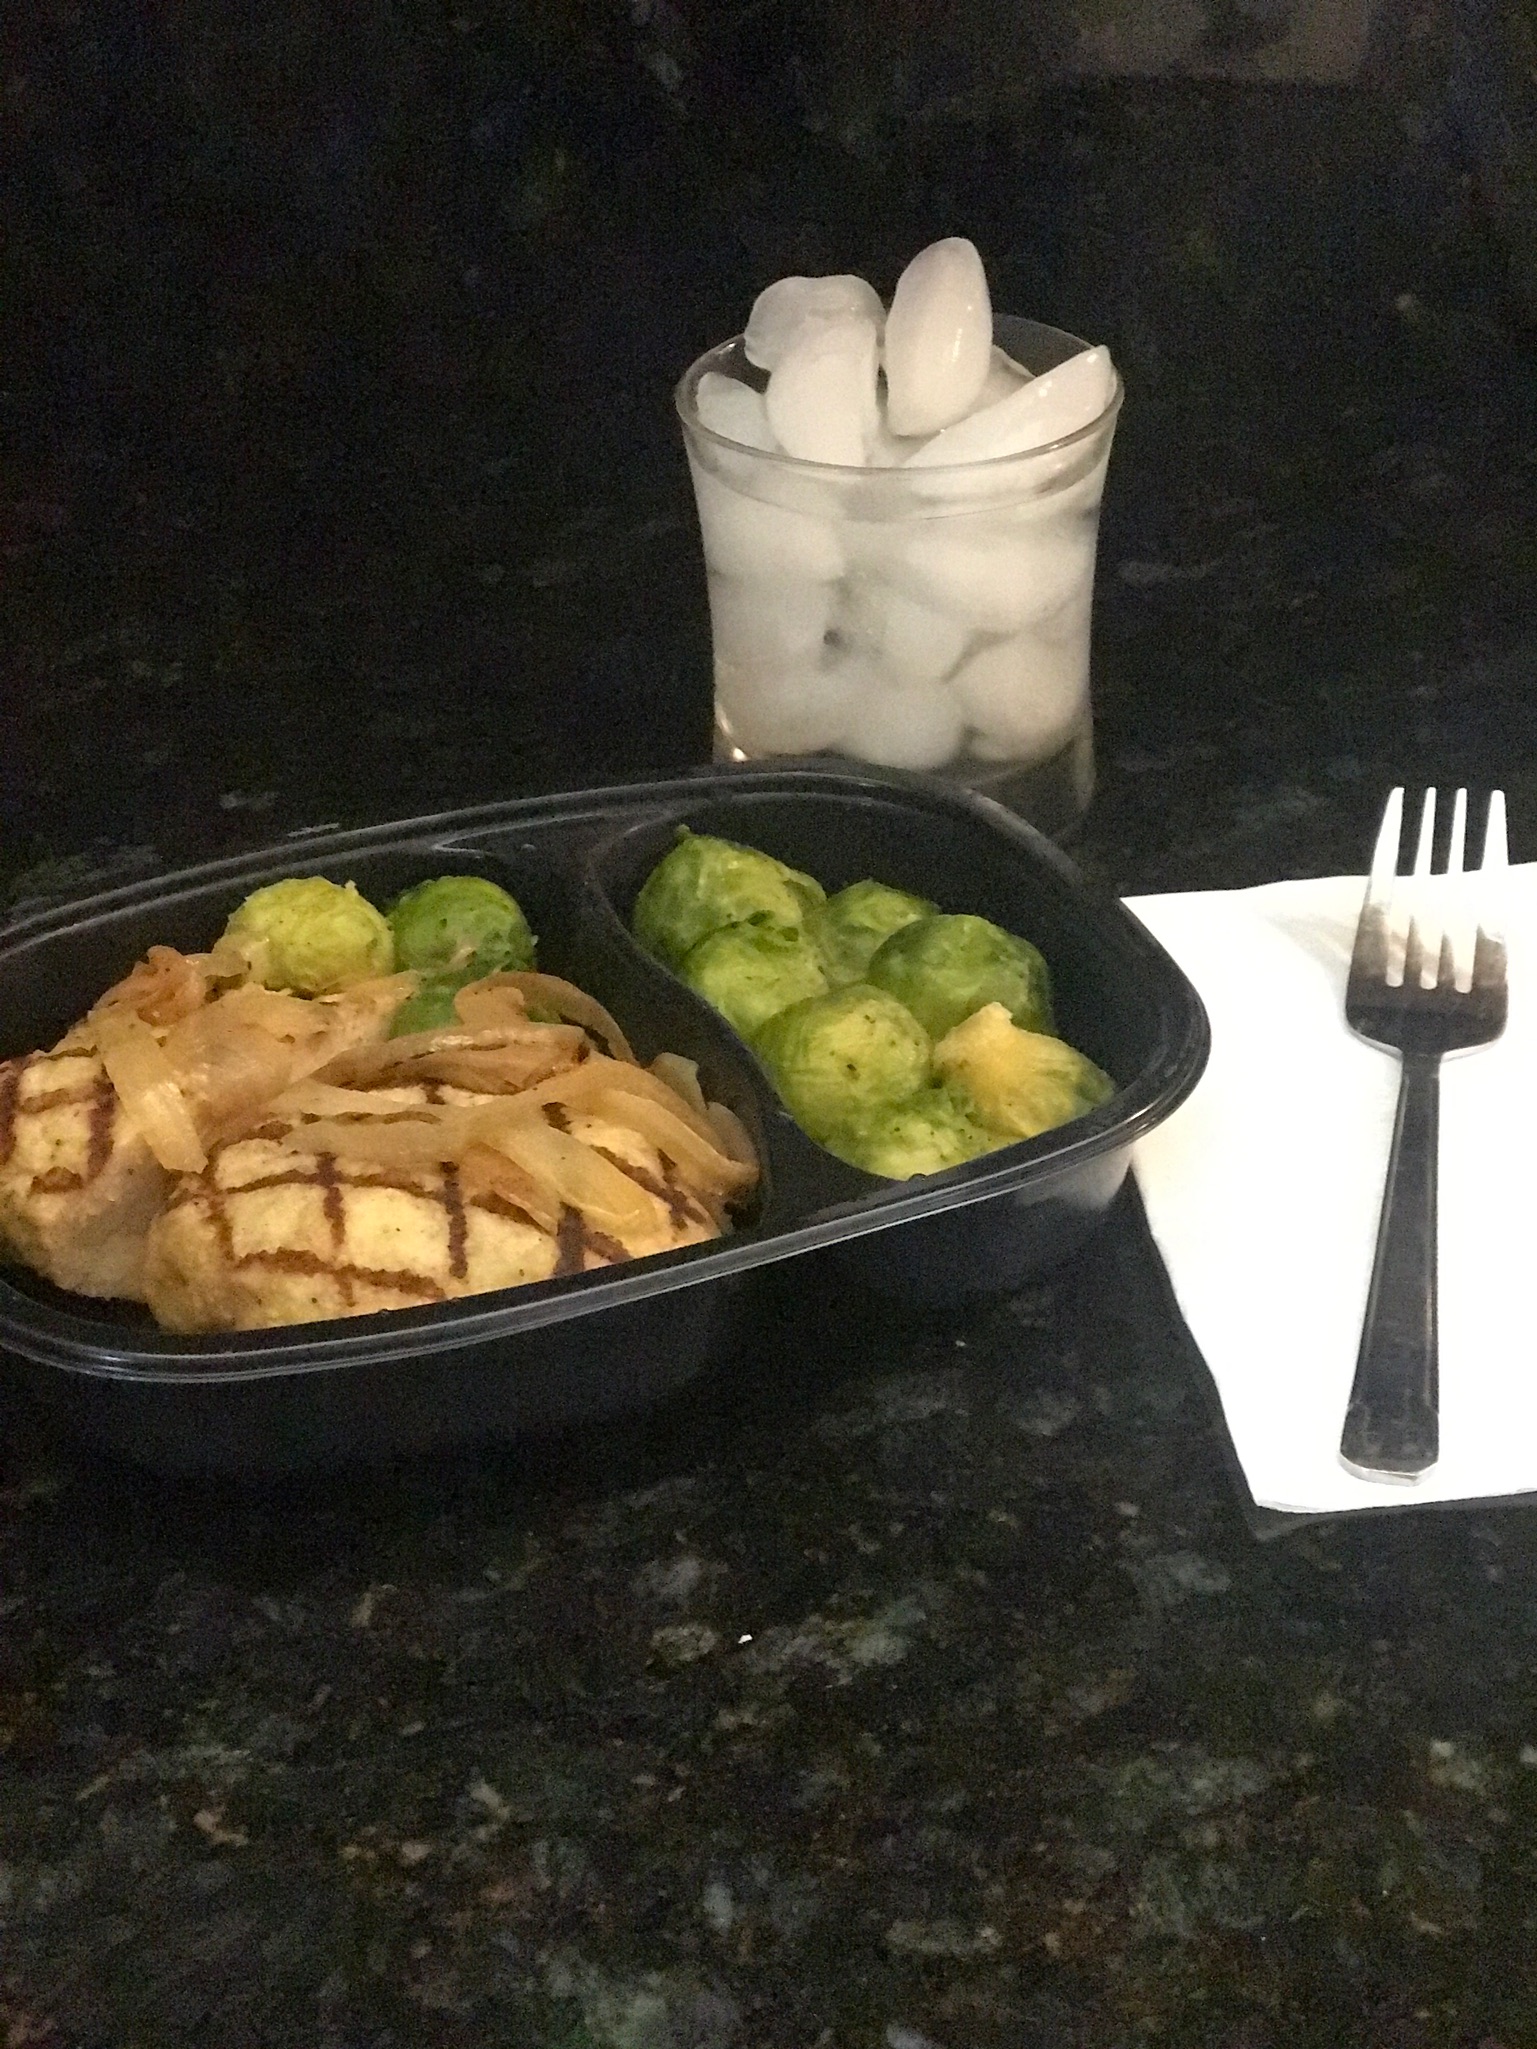 Top Chef Meals Delivers Custom Prepared Healthy Meals